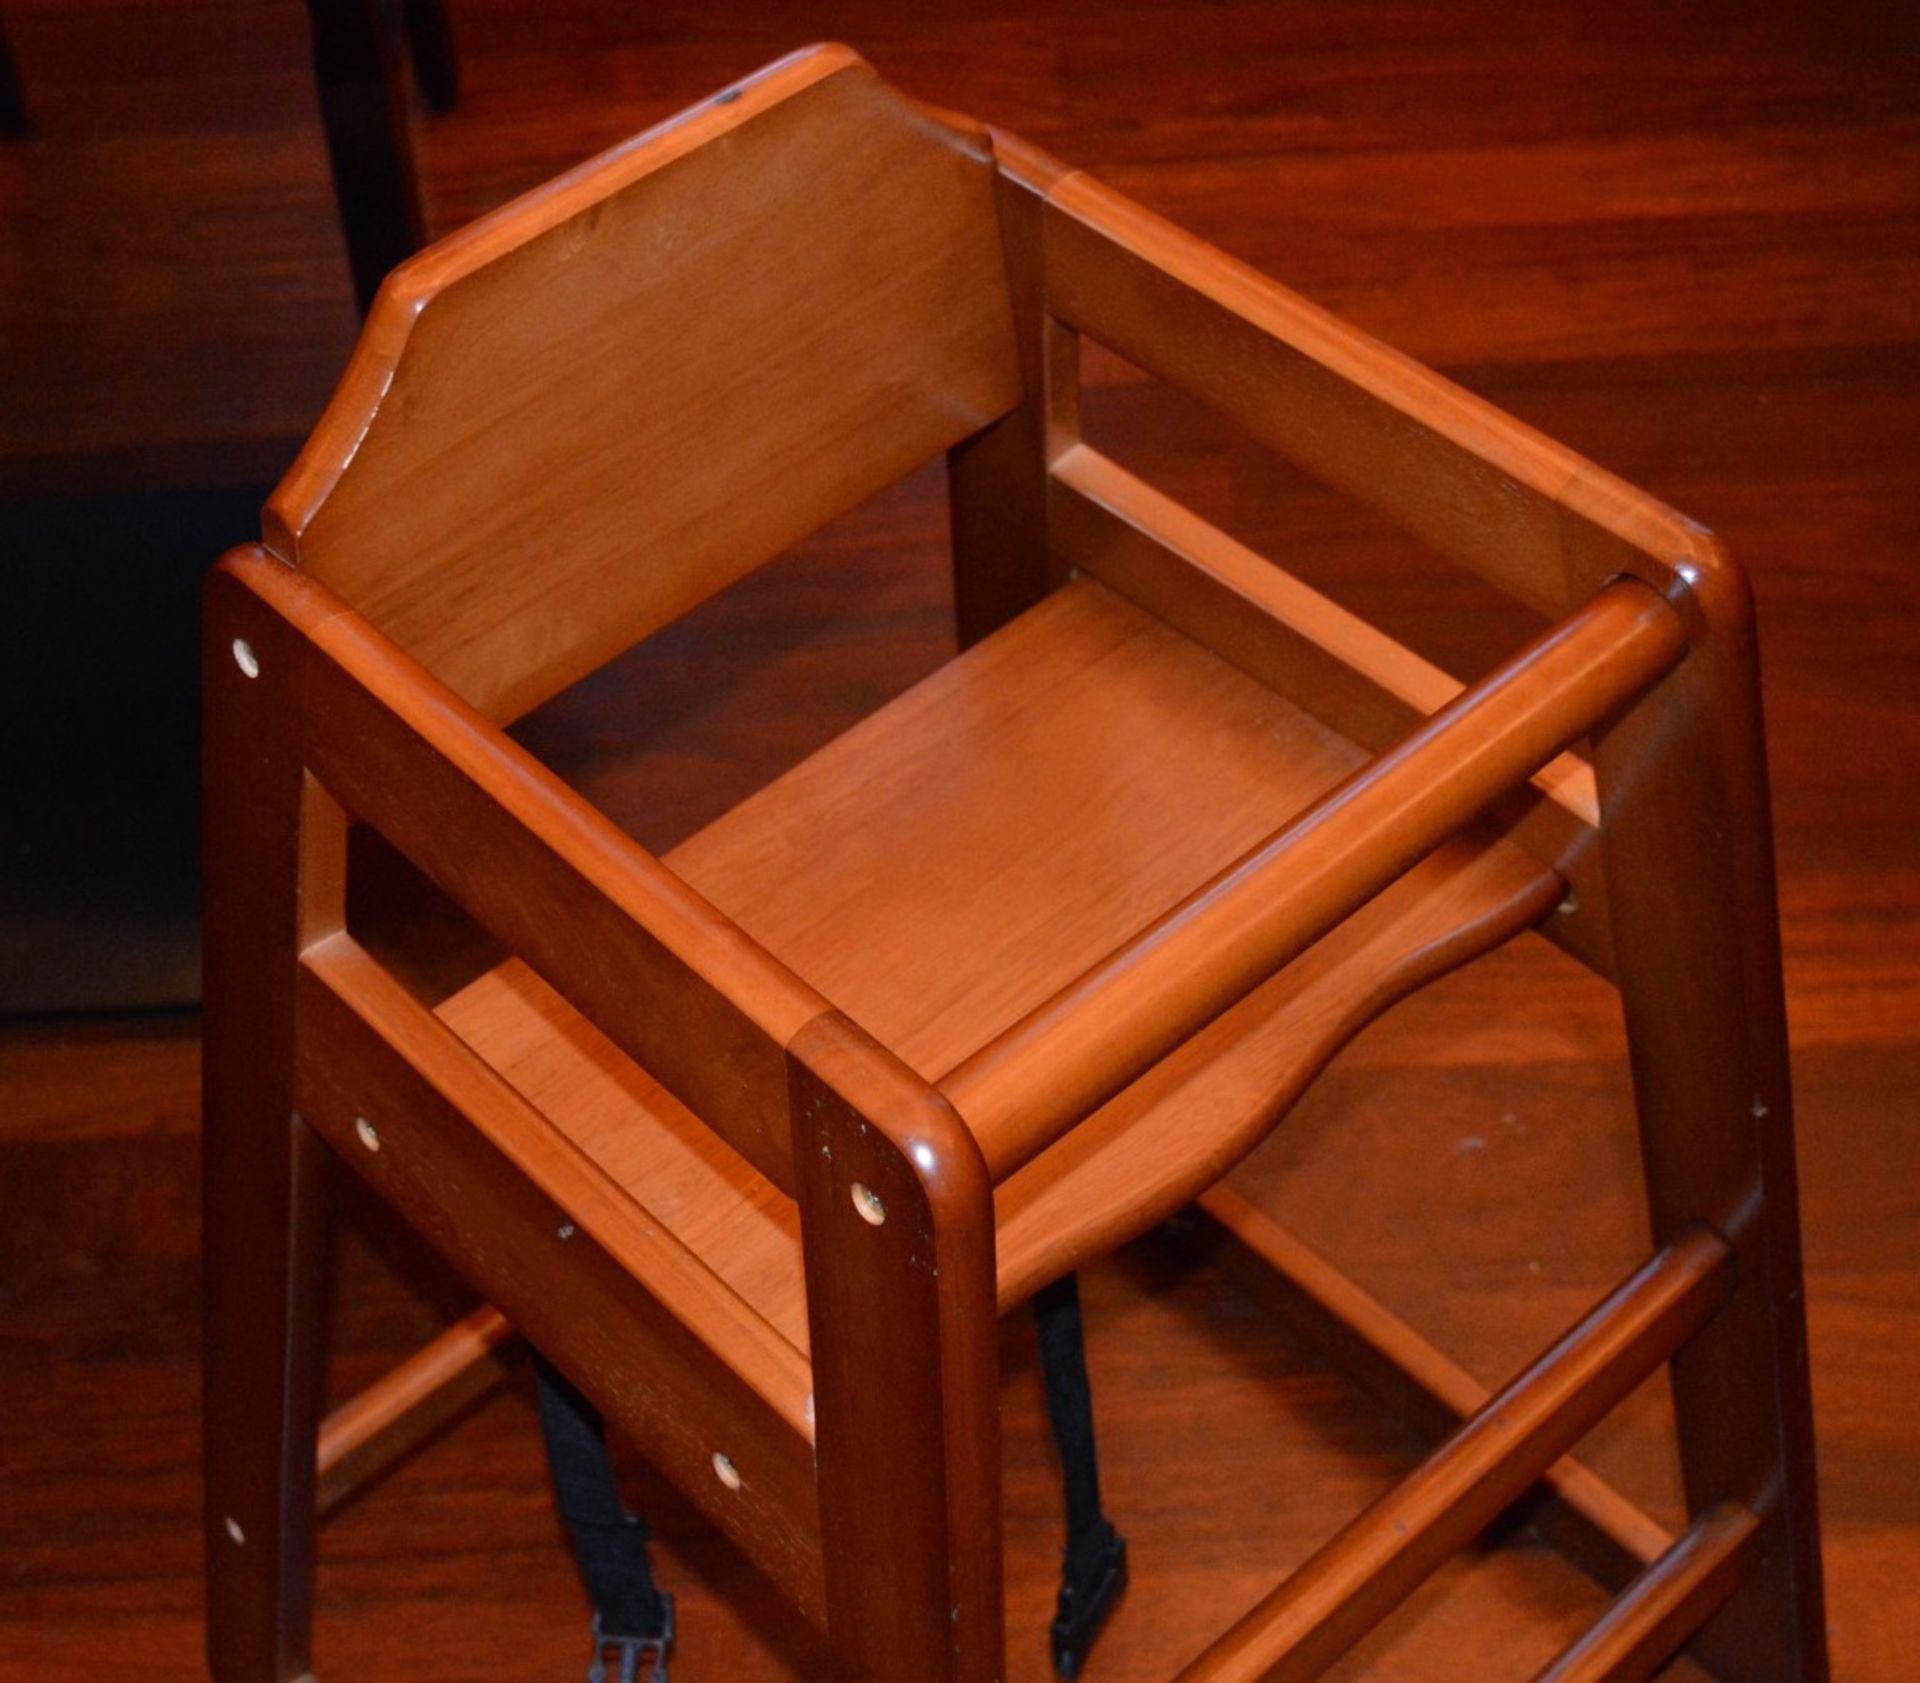 4 x Childs High Chairs - CL353 - Image 4 of 4